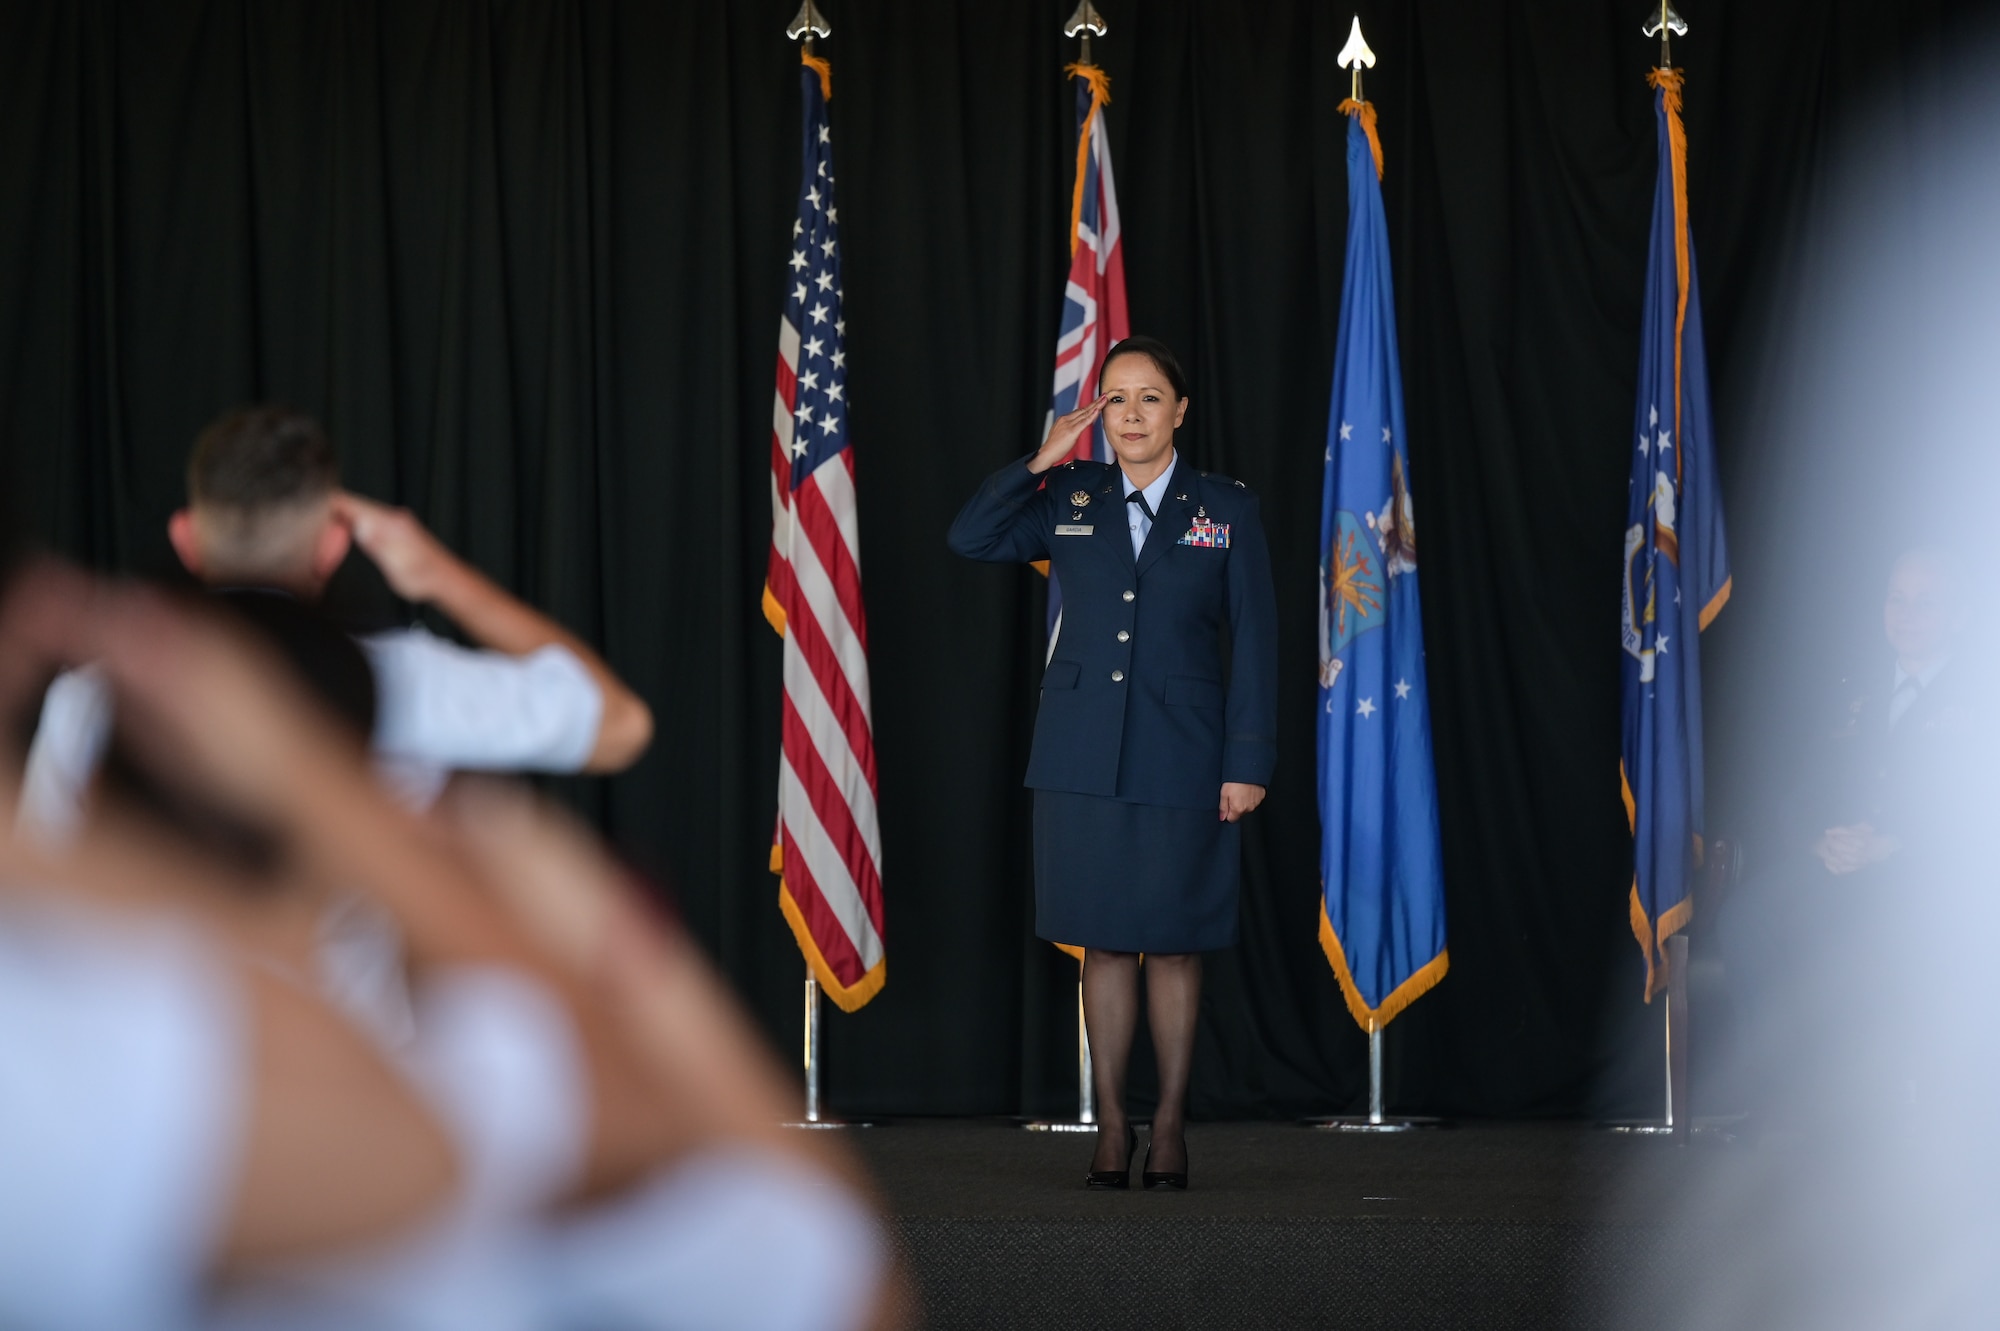 Col. Stella Garcia, 15th Medical Group commander, receives her first salute during a change of command ceremony at Joint Base Pearl Harbor-Hickam, Hawaii, Aug. 1, 2022. Airmen assigned to the 15th Healthcare Operations Squadron, the 15th Medical Support Squadron and the 15th Operational Medical Readiness Squadron rendered Garcia’s first salute. (U.S. Air Force photo by Staff Sgt. Alan Ricker)